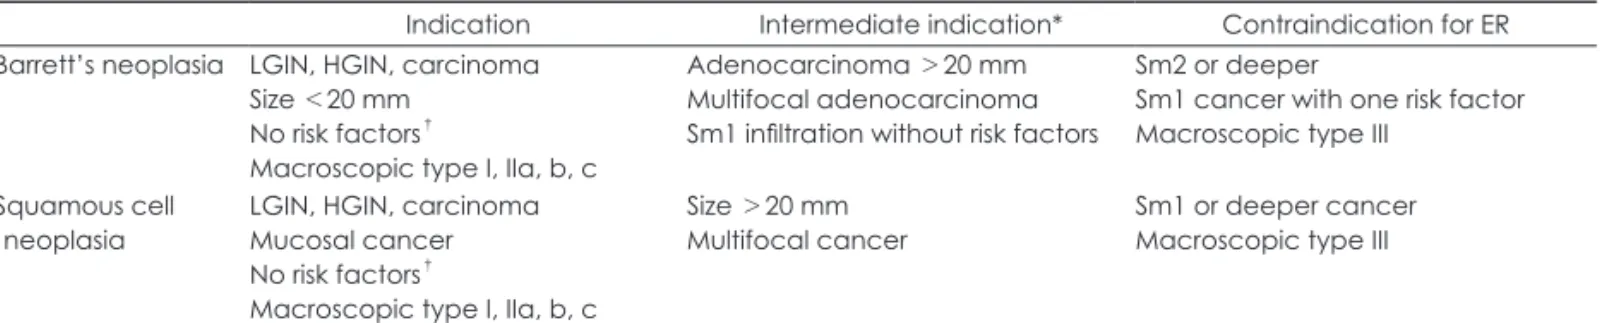 Table 2. Suggested indications and contraindications for endoscopic mucosal resection in esophageal dysplasia and early esopha- esopha-geal cancer 1)